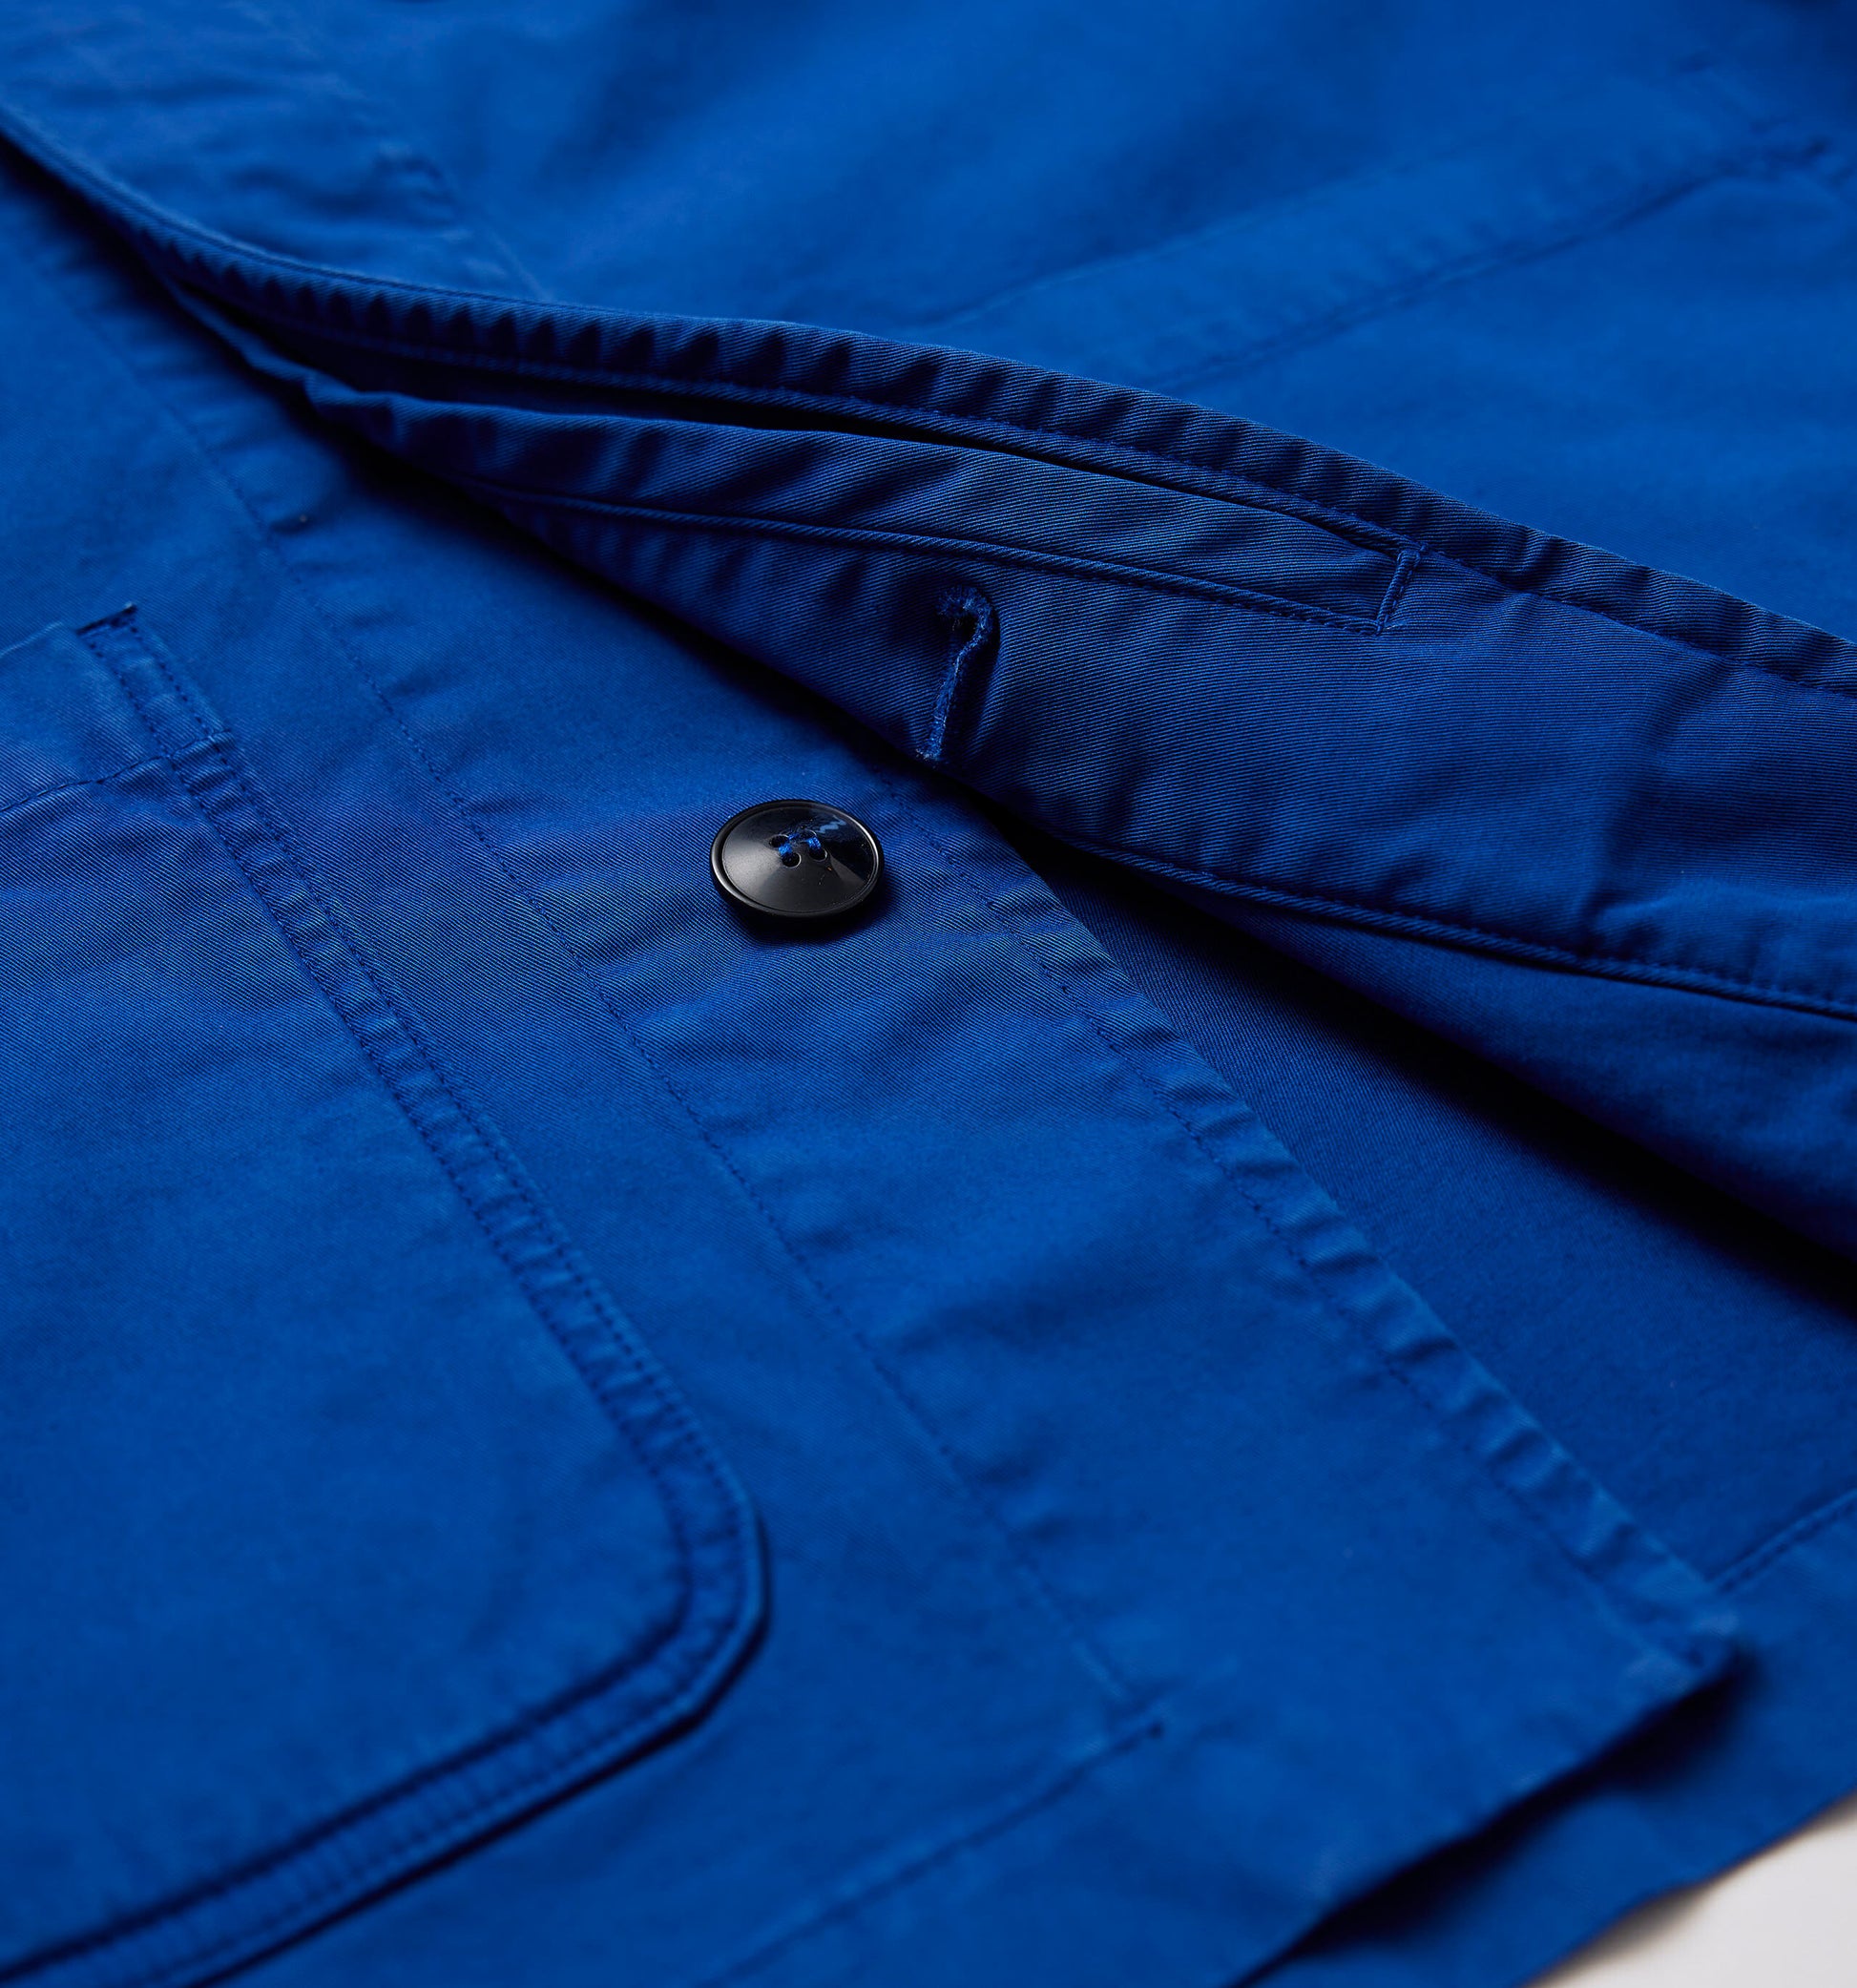 The Benjamin - Twill Stretch-Cotton Overshirt In Blue From King Essentials